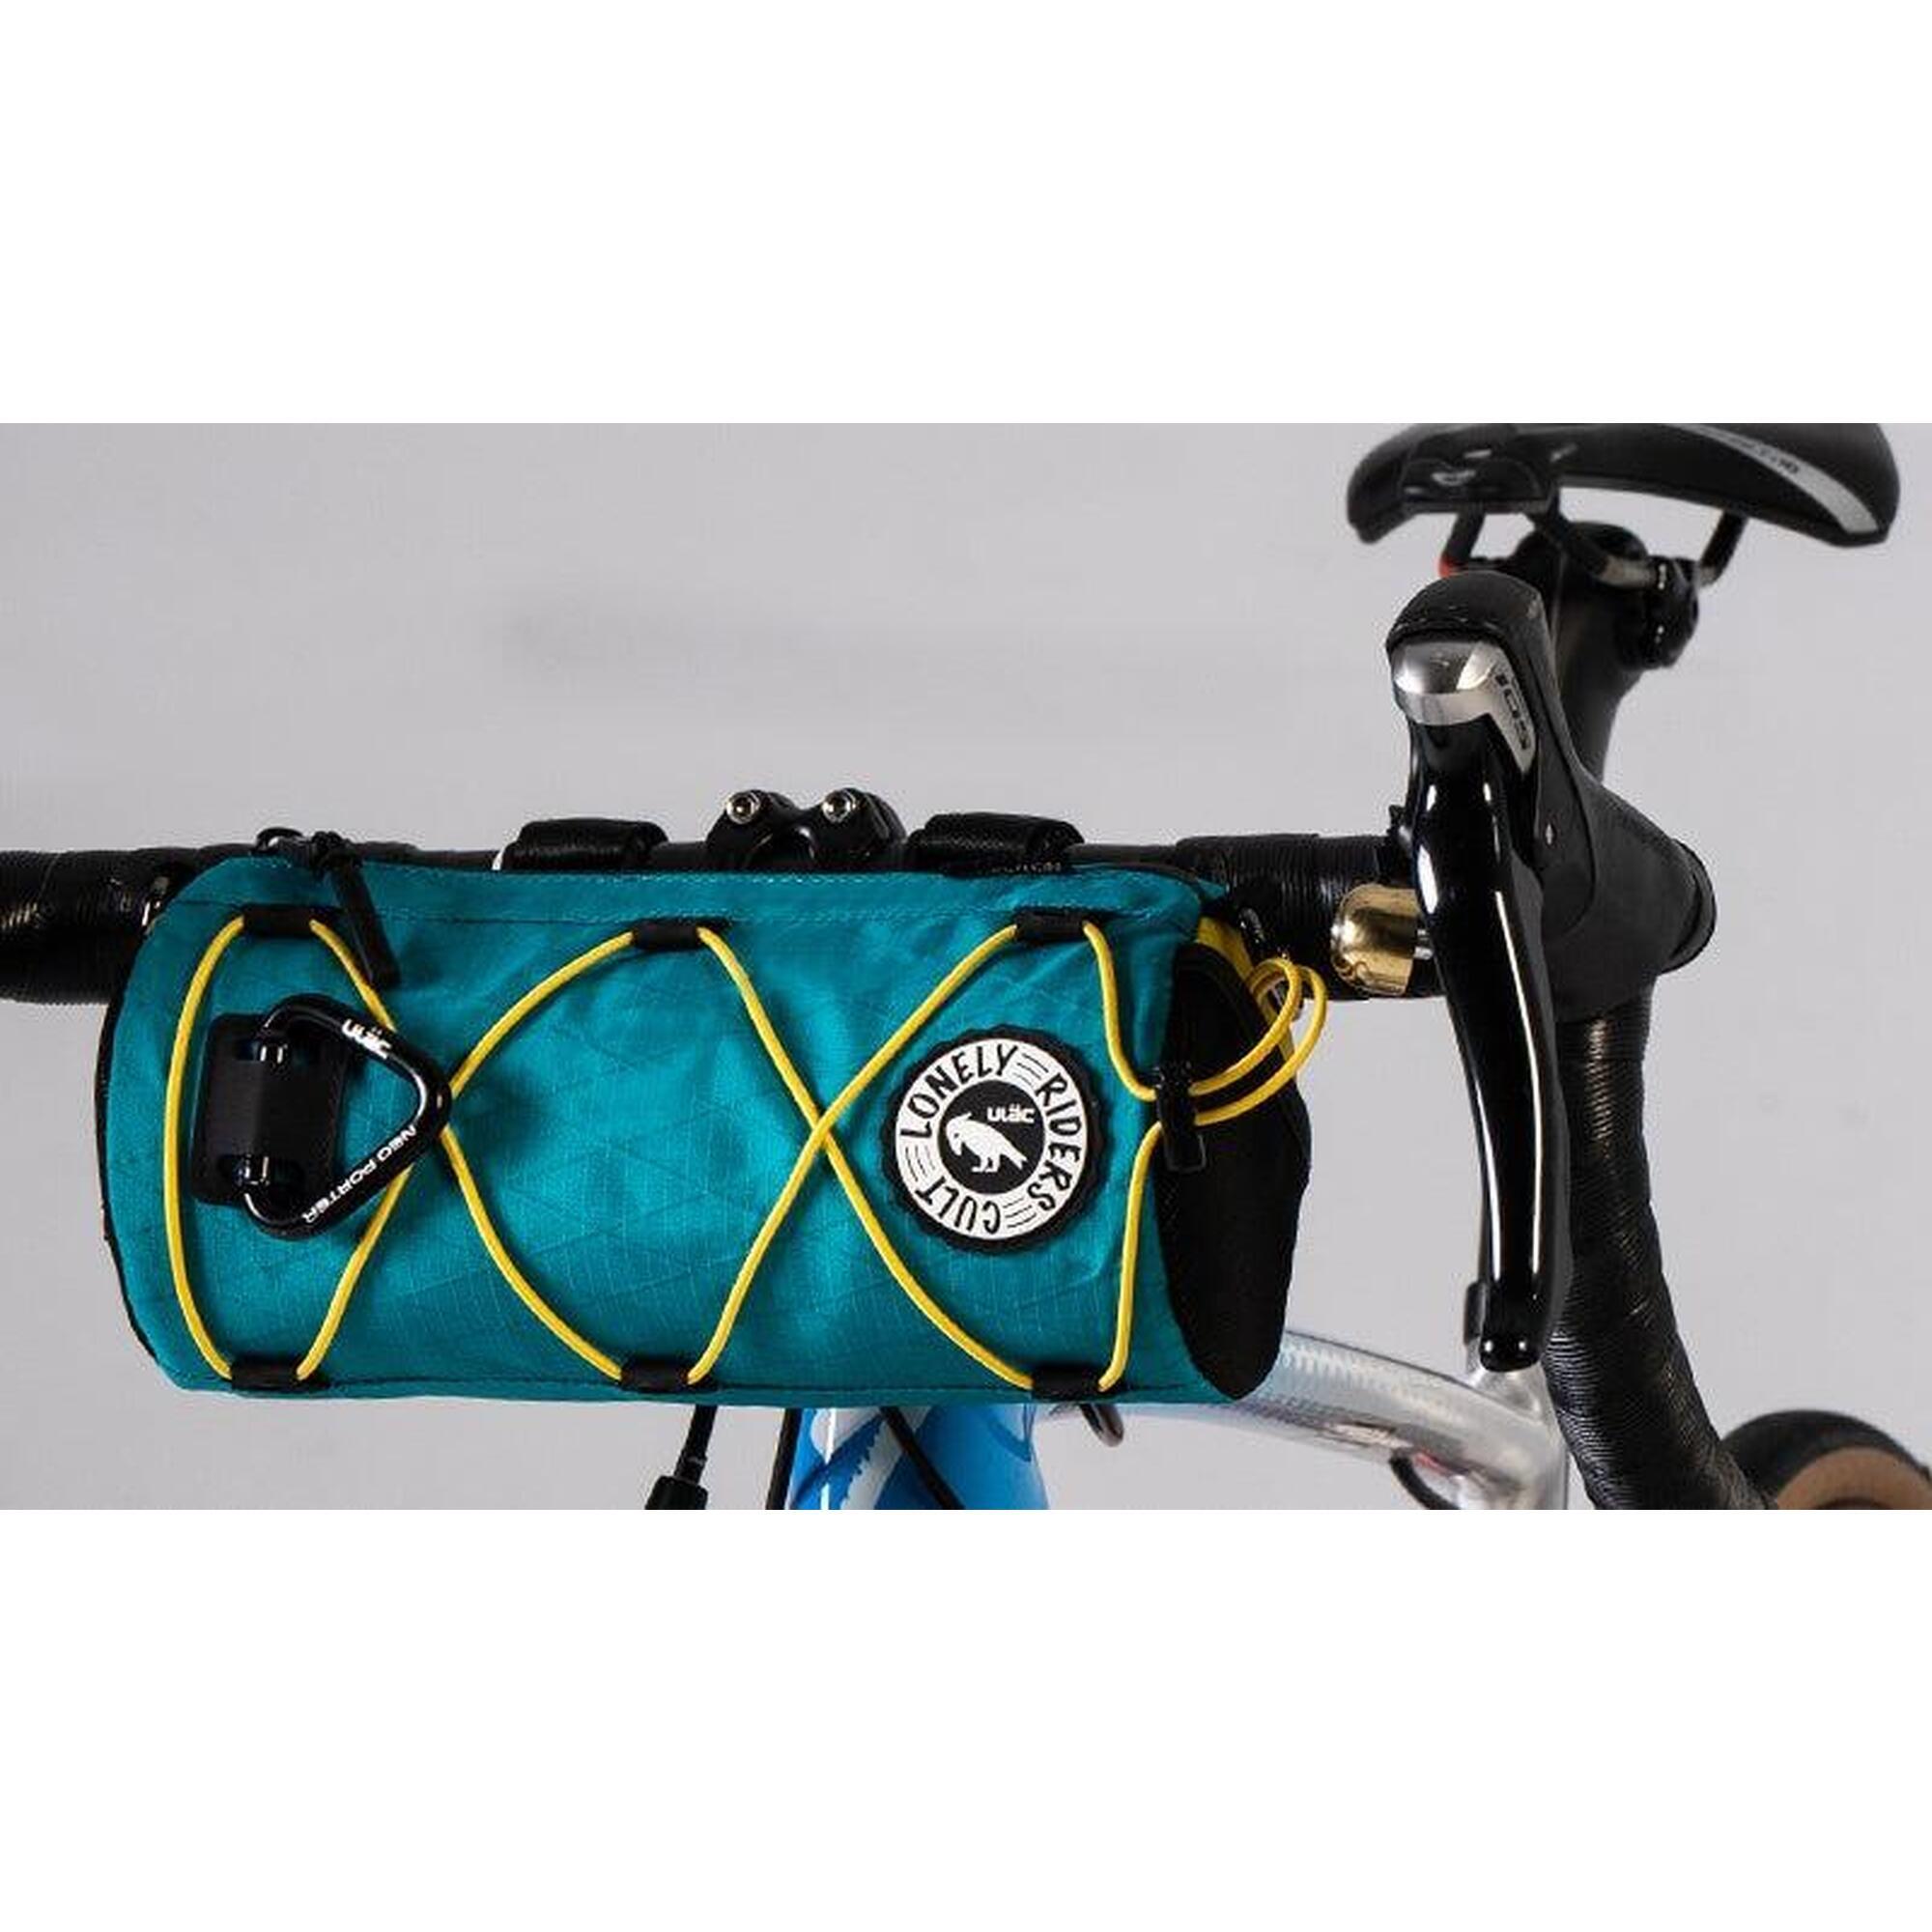 COURSIER GT FRONT CYCLING BAG 1.7L - TEAL